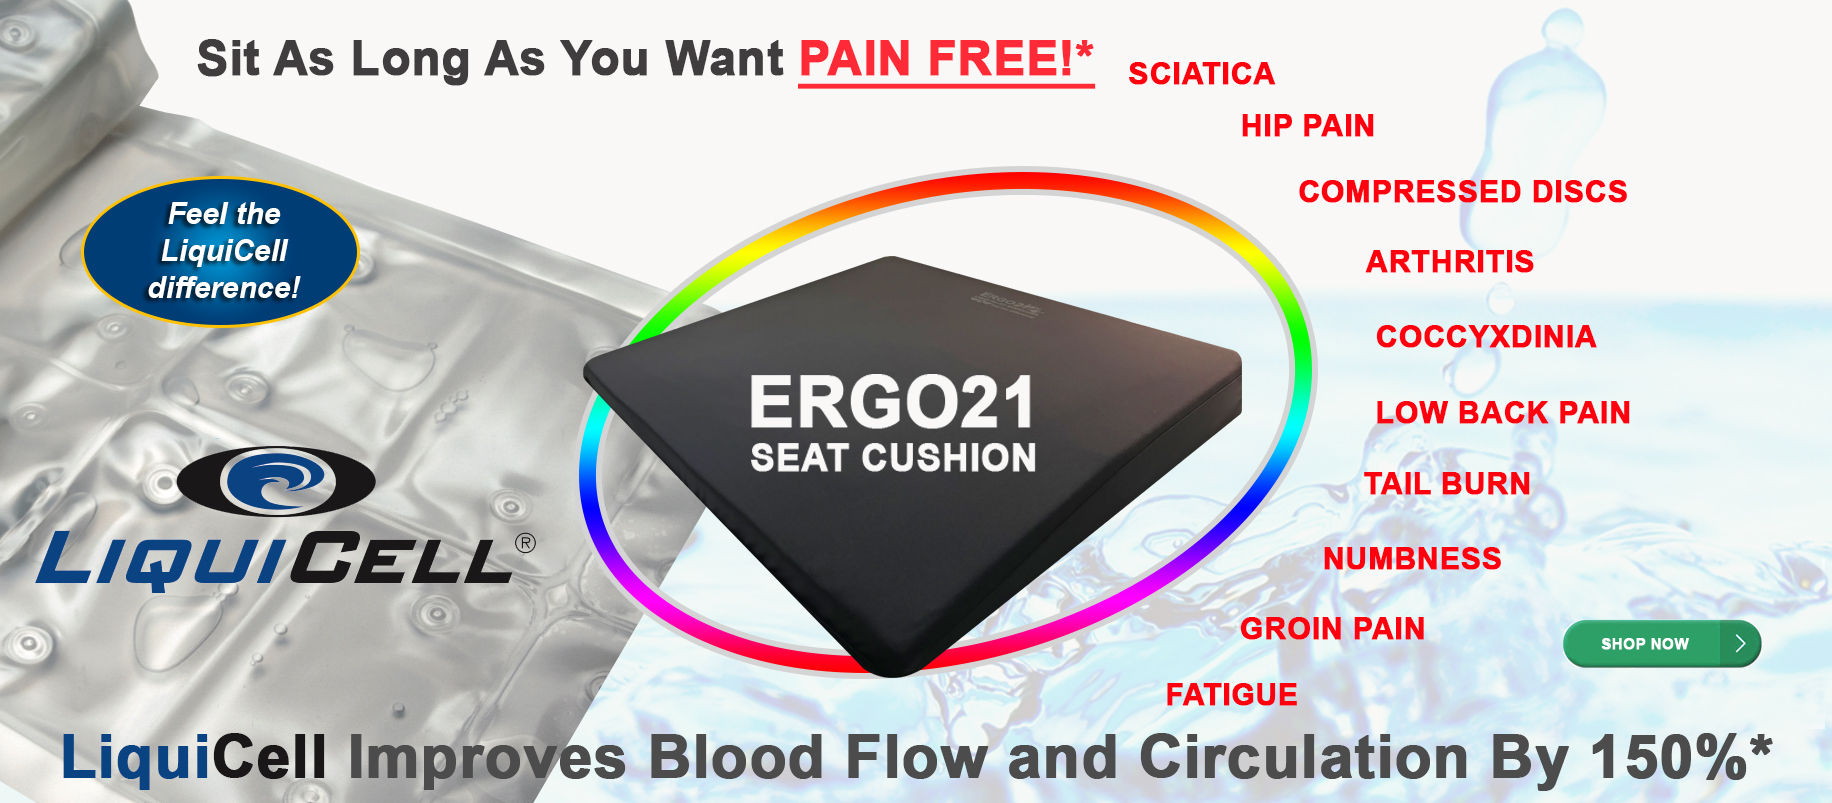 Ergo21 Announce the Expansion of Wheelchair Cushion with 4 Different Sizes  – Regular, Large, Large Deluxe, Extra-Large